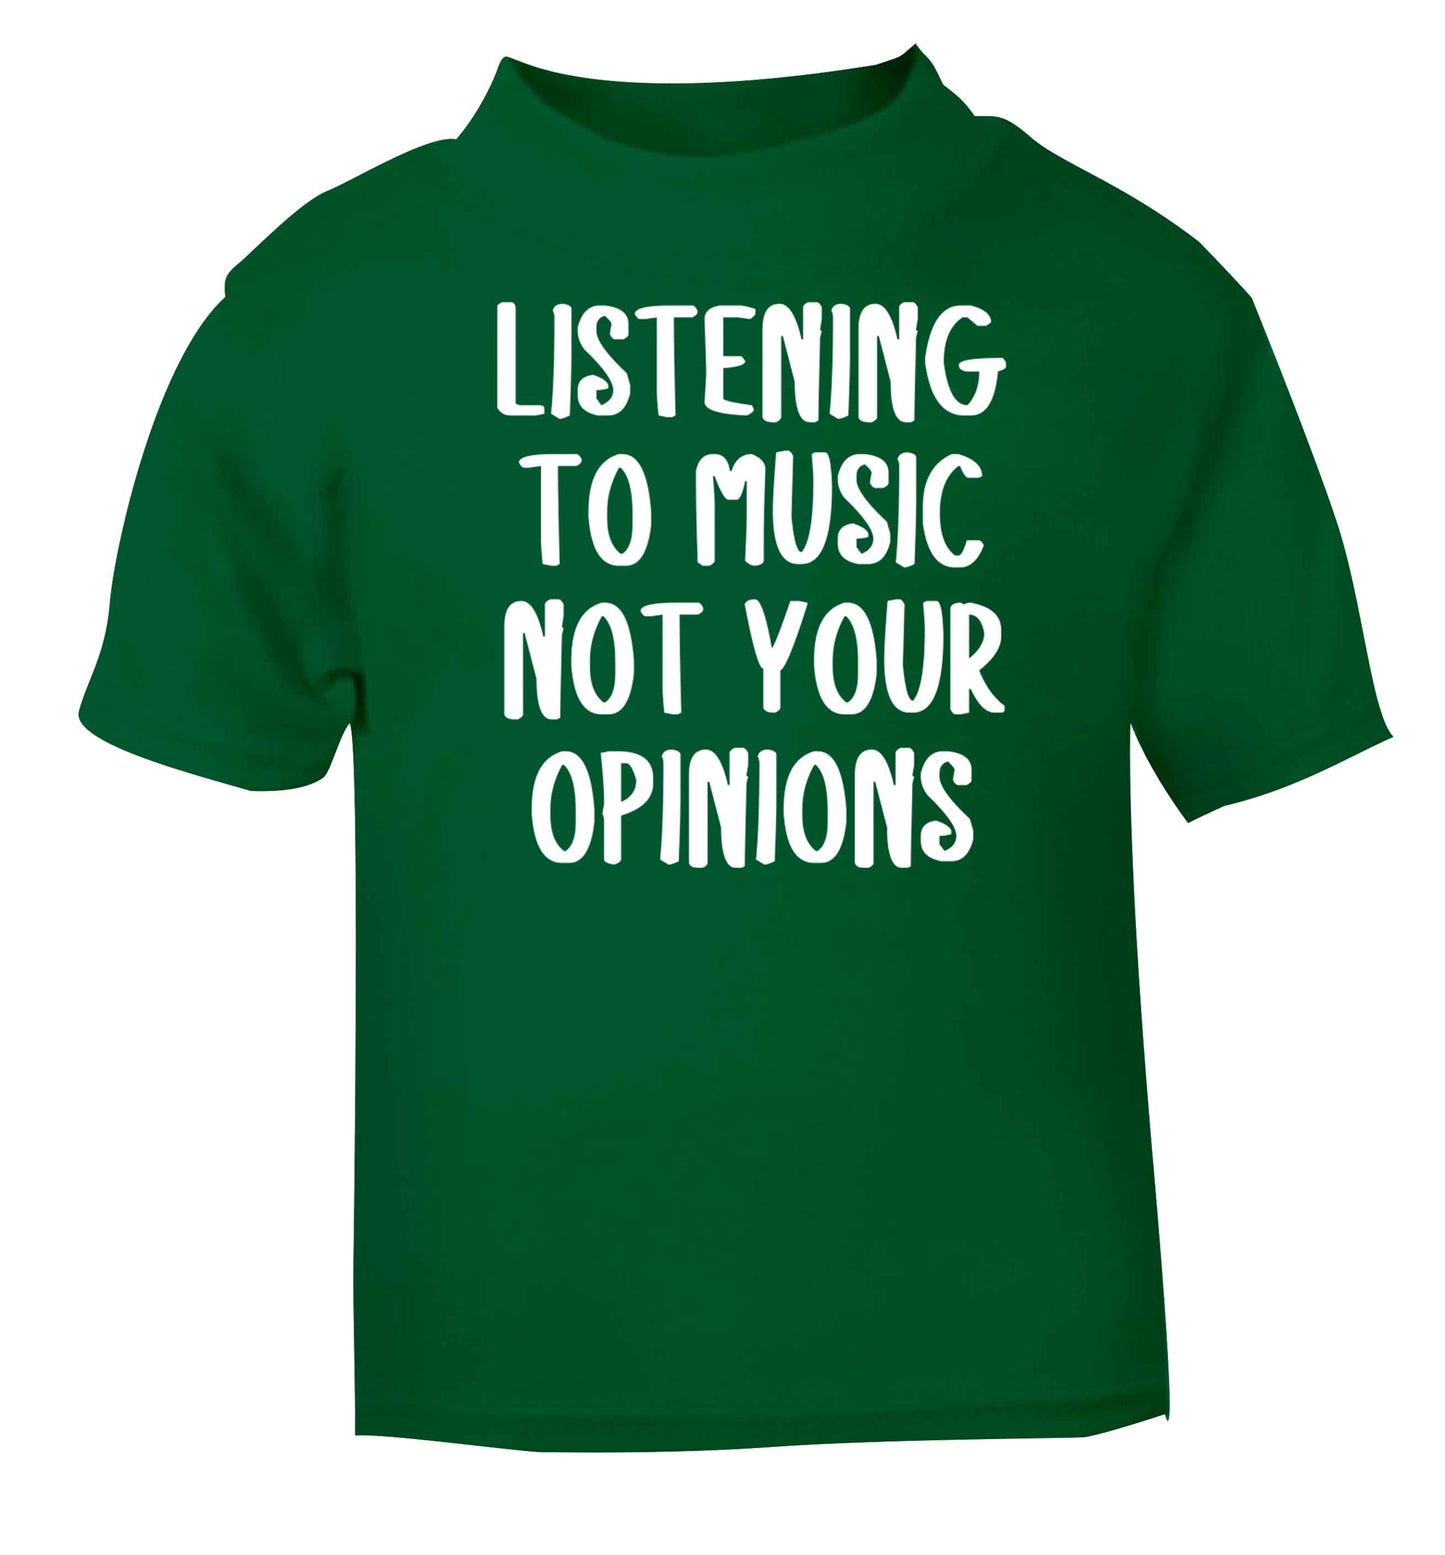 Listening to music not your opinions green baby toddler Tshirt 2 Years